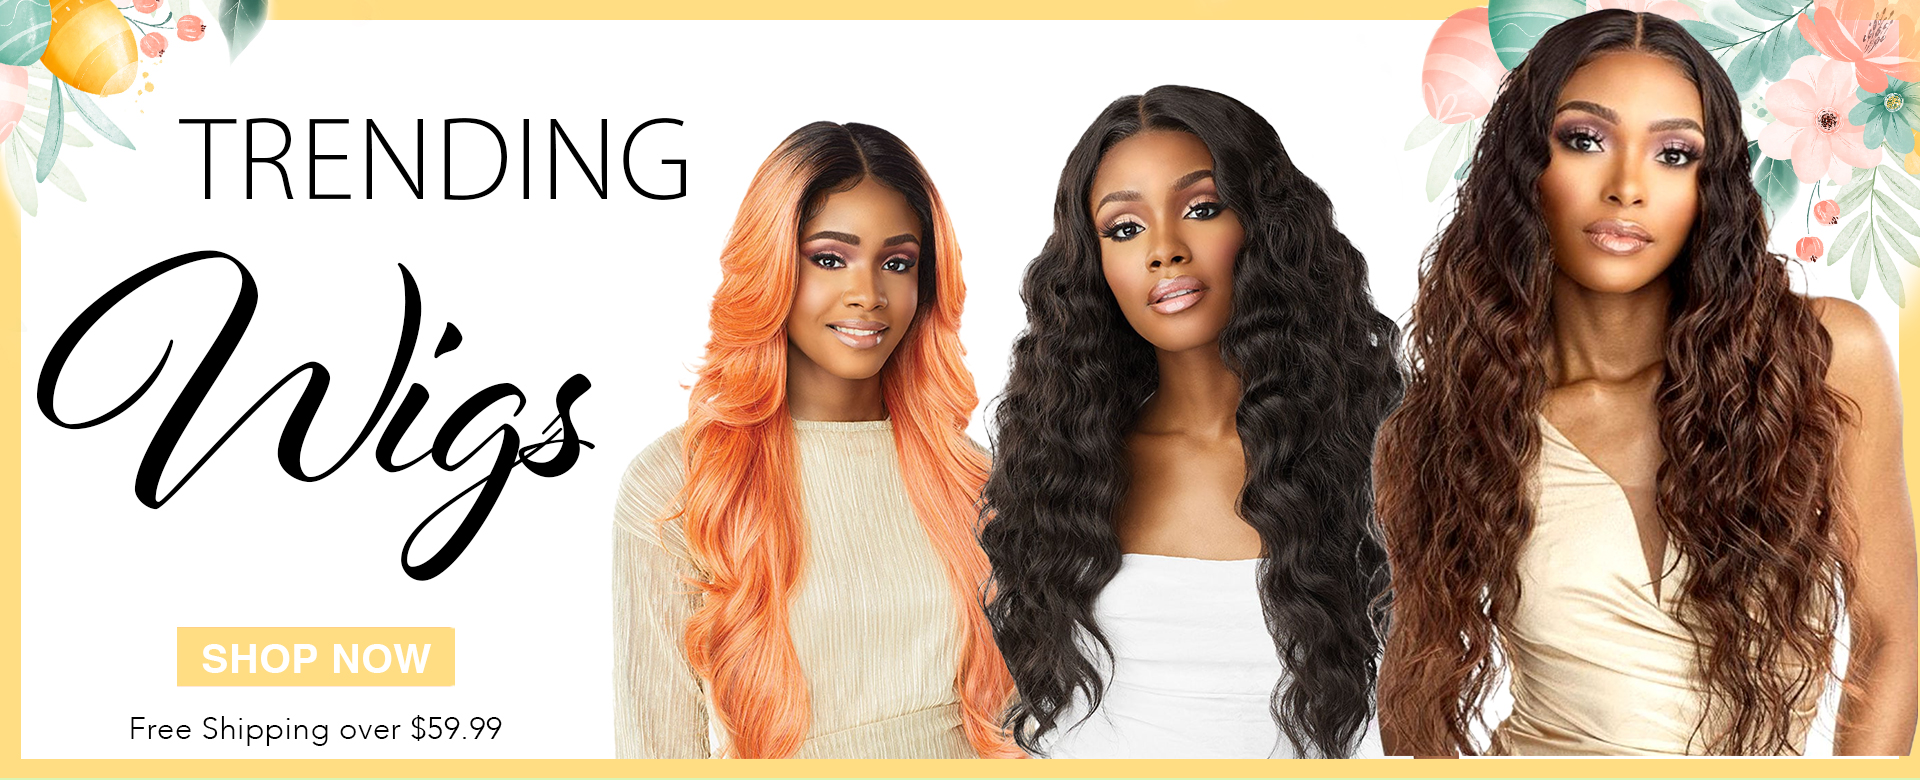 Wigs Trending promotion with three women